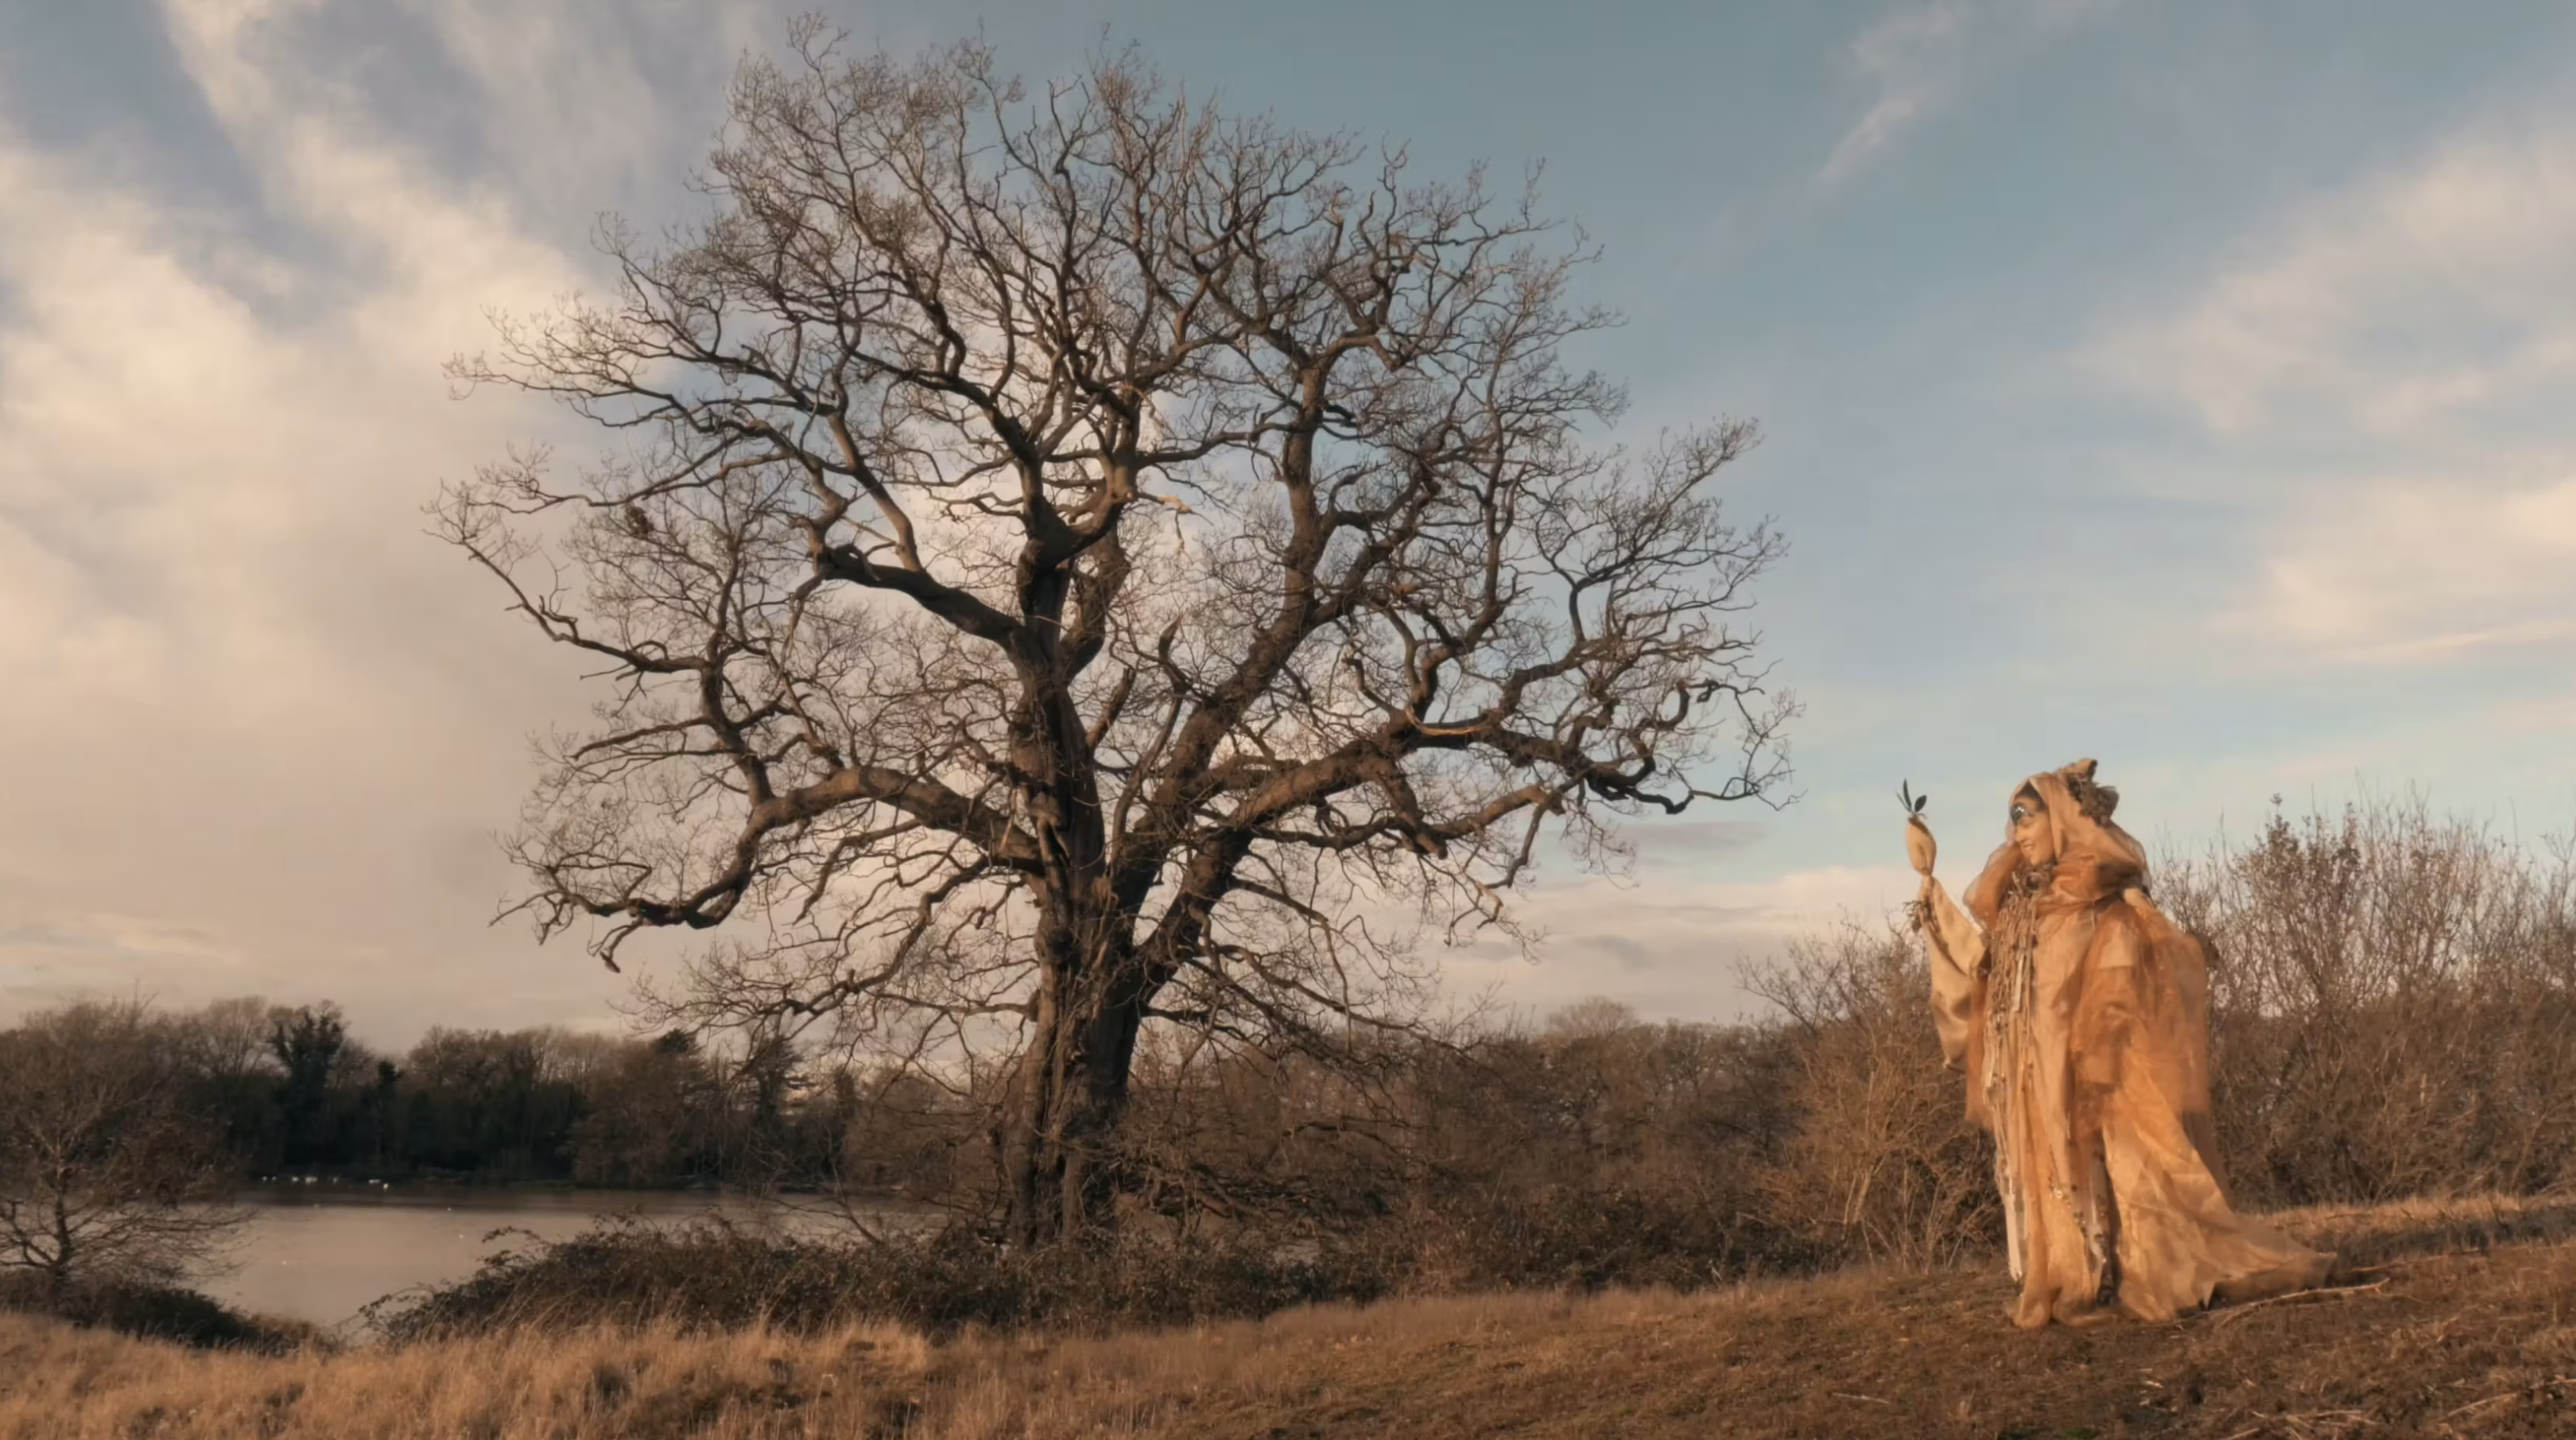 Breathe Believe - music video for Adrian Snell. Directed by Elinor Coleman, DP & Editor Rachel Bunce, RB Films.